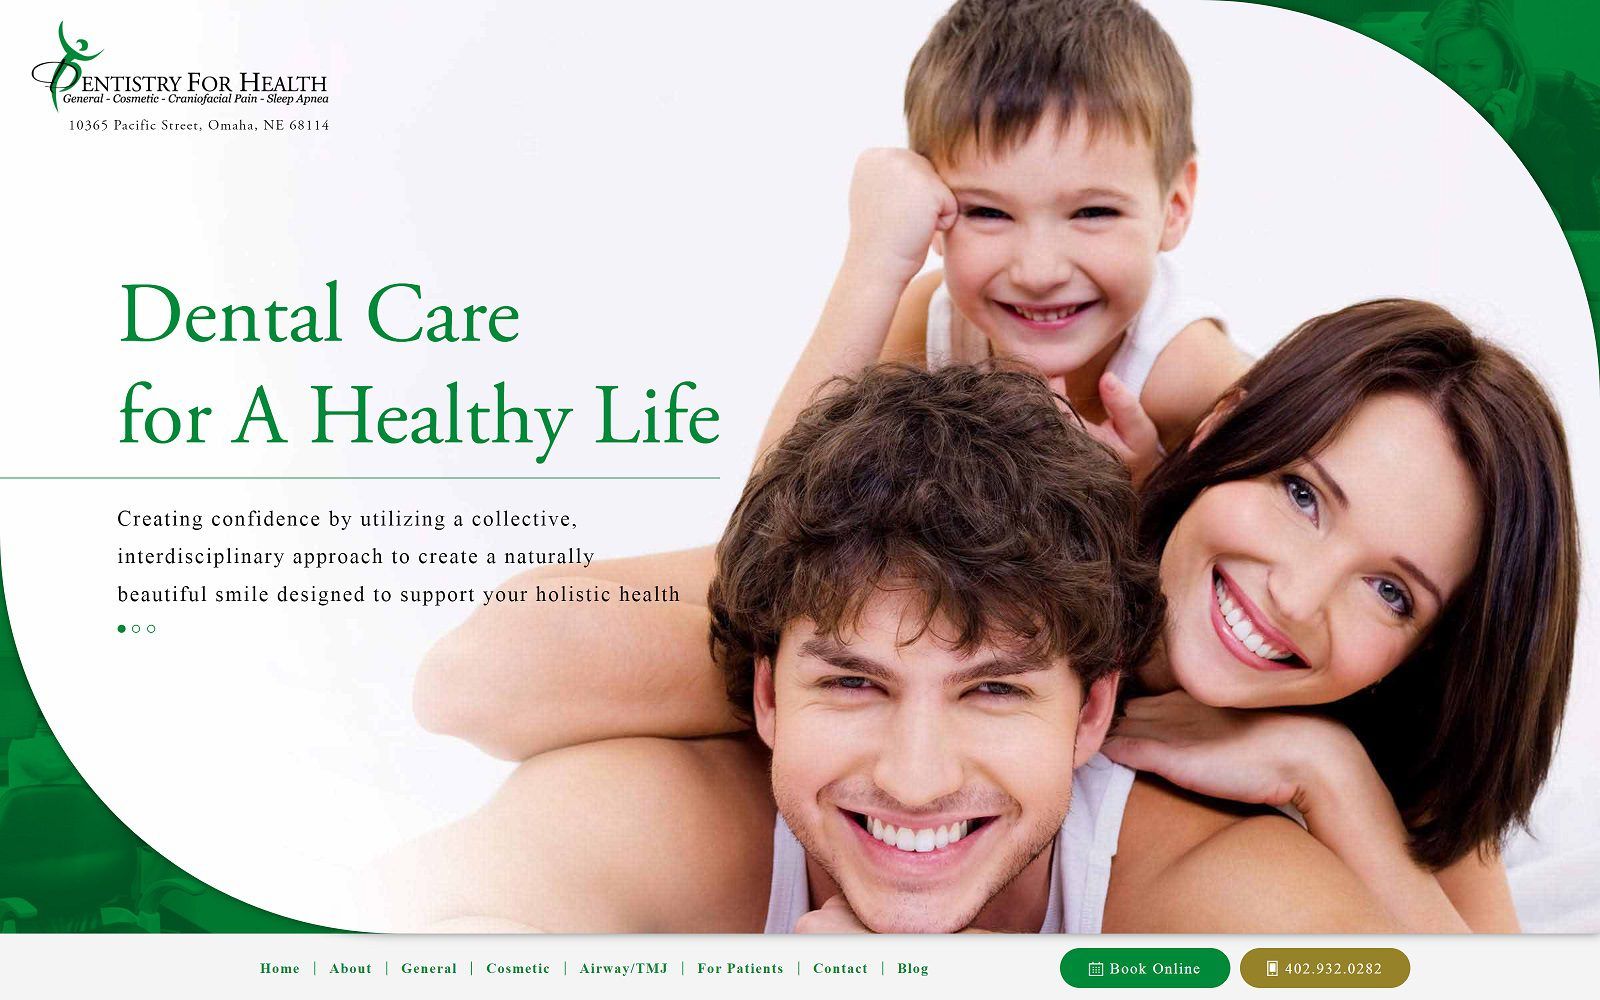 The Screenshot of Dentistry For Health Website